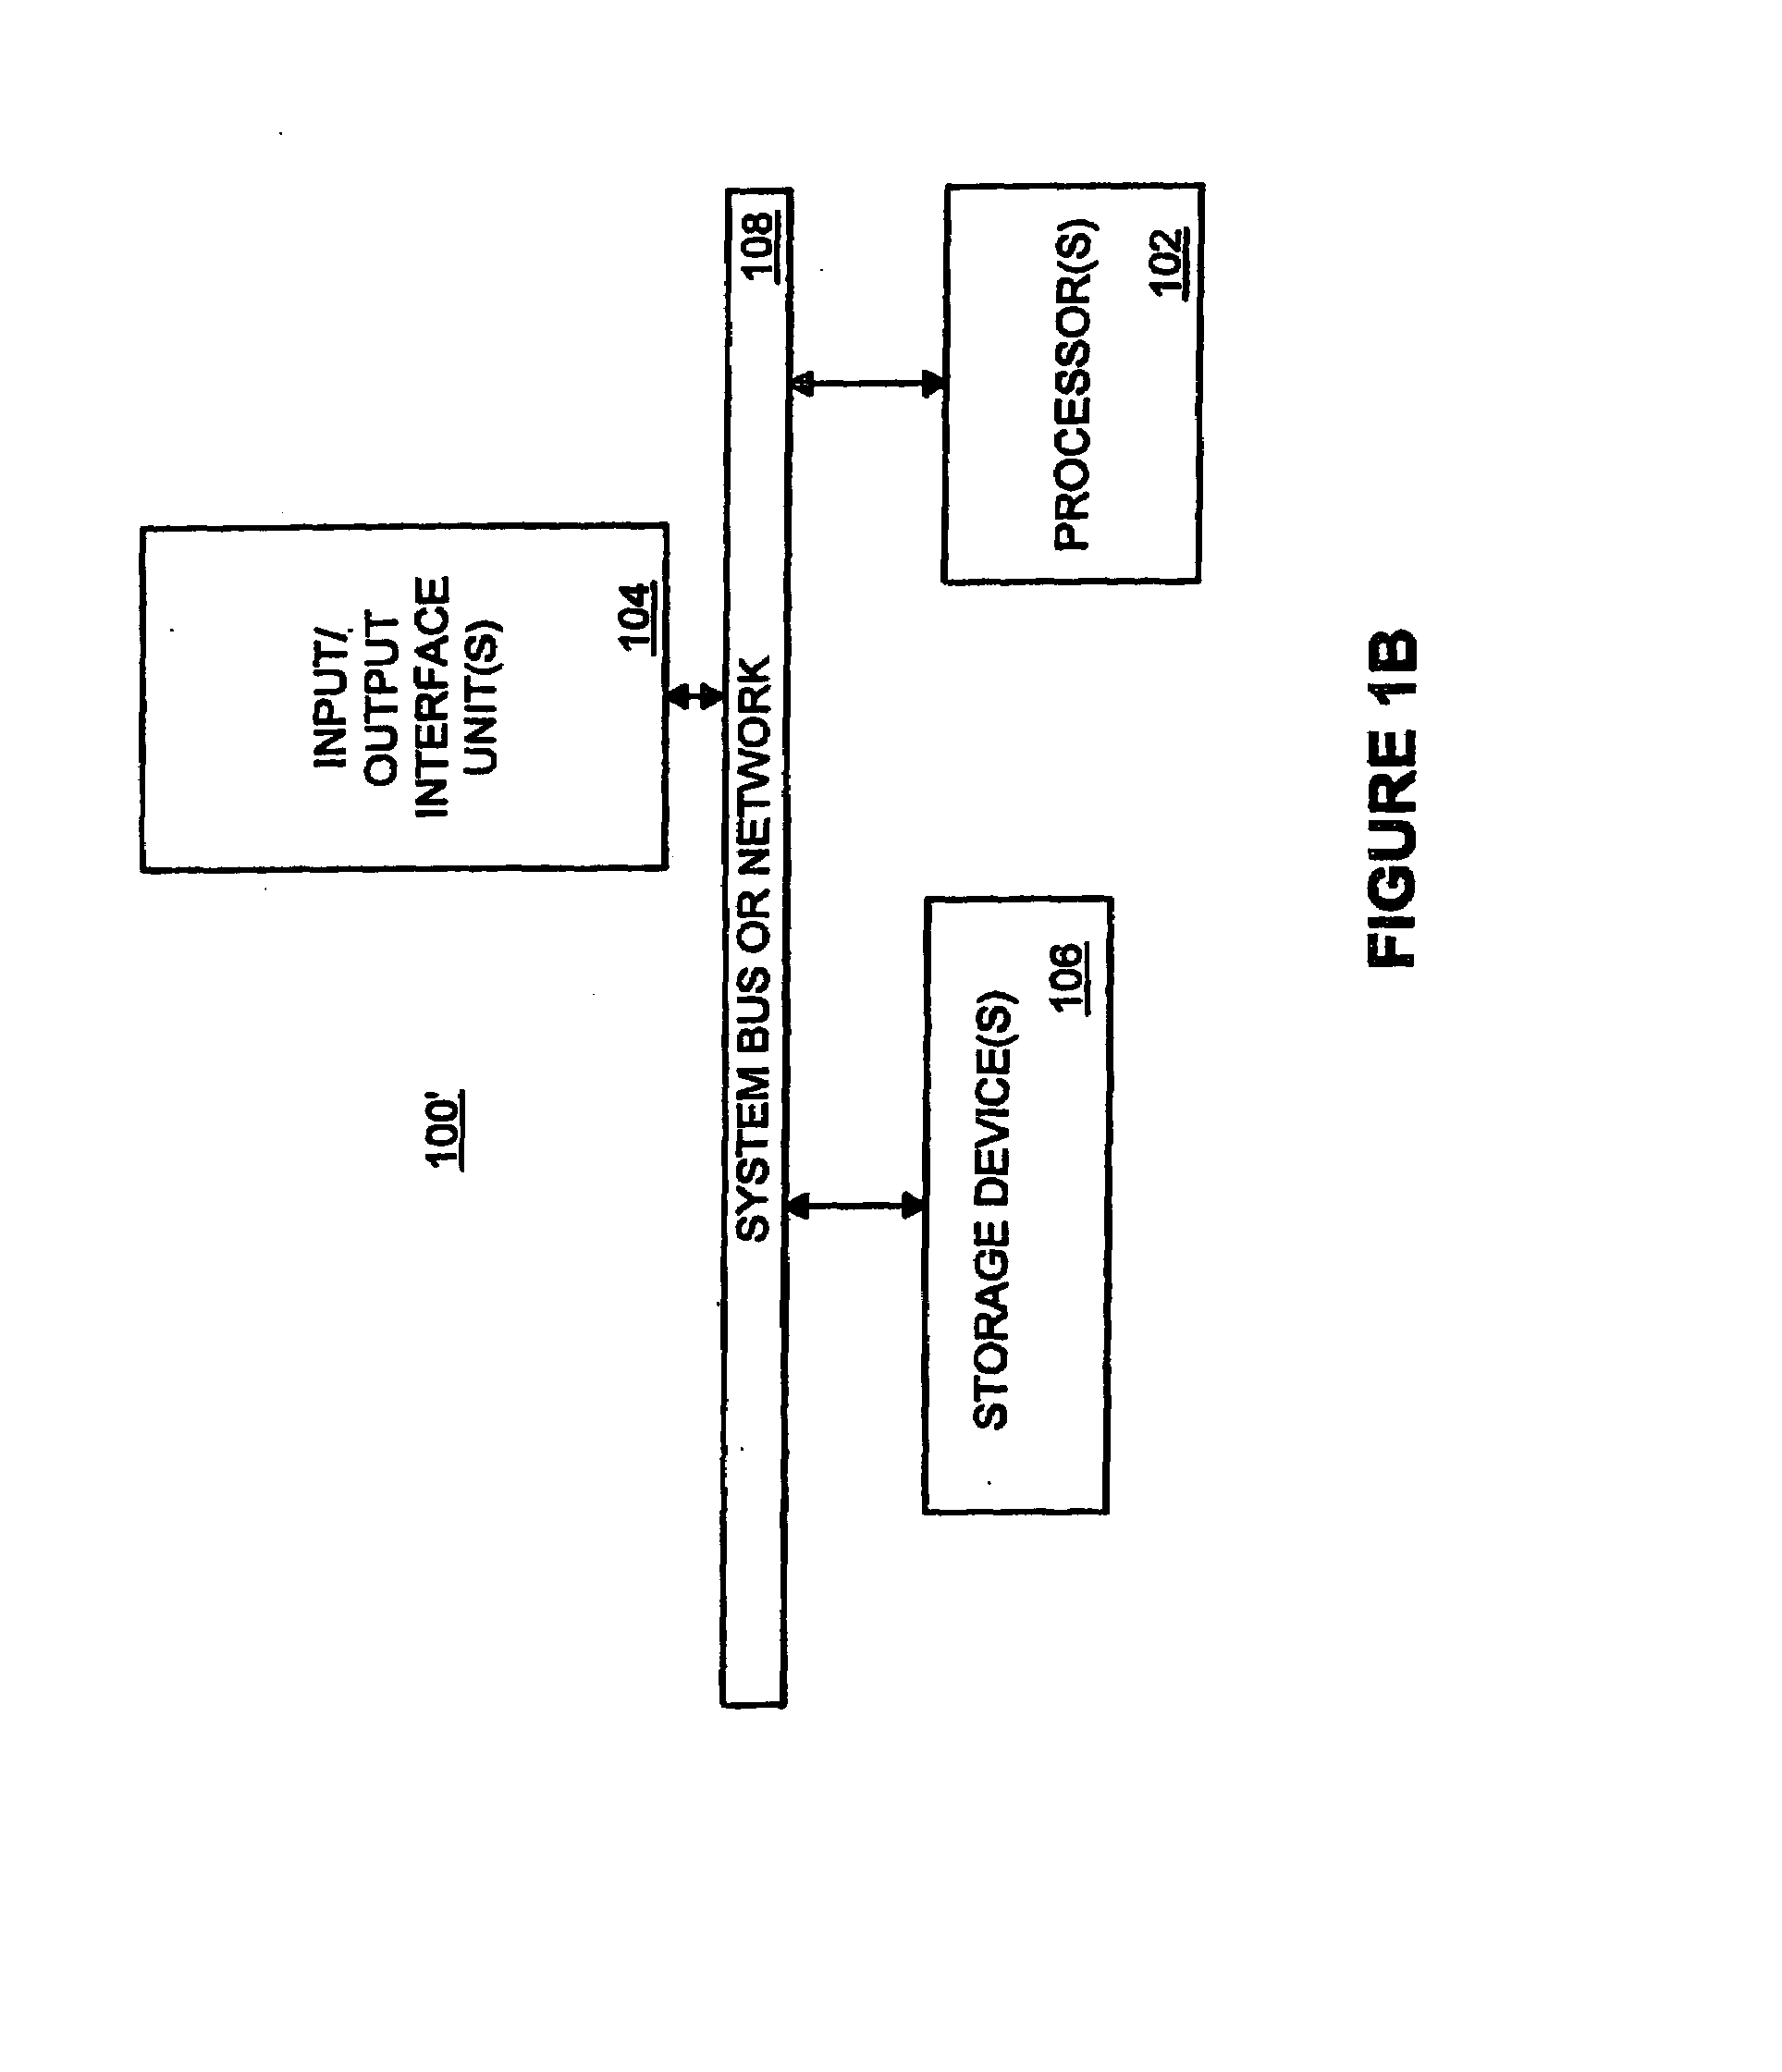 Methods, apparatus and data structures for providing a user interface which facilitates decision making